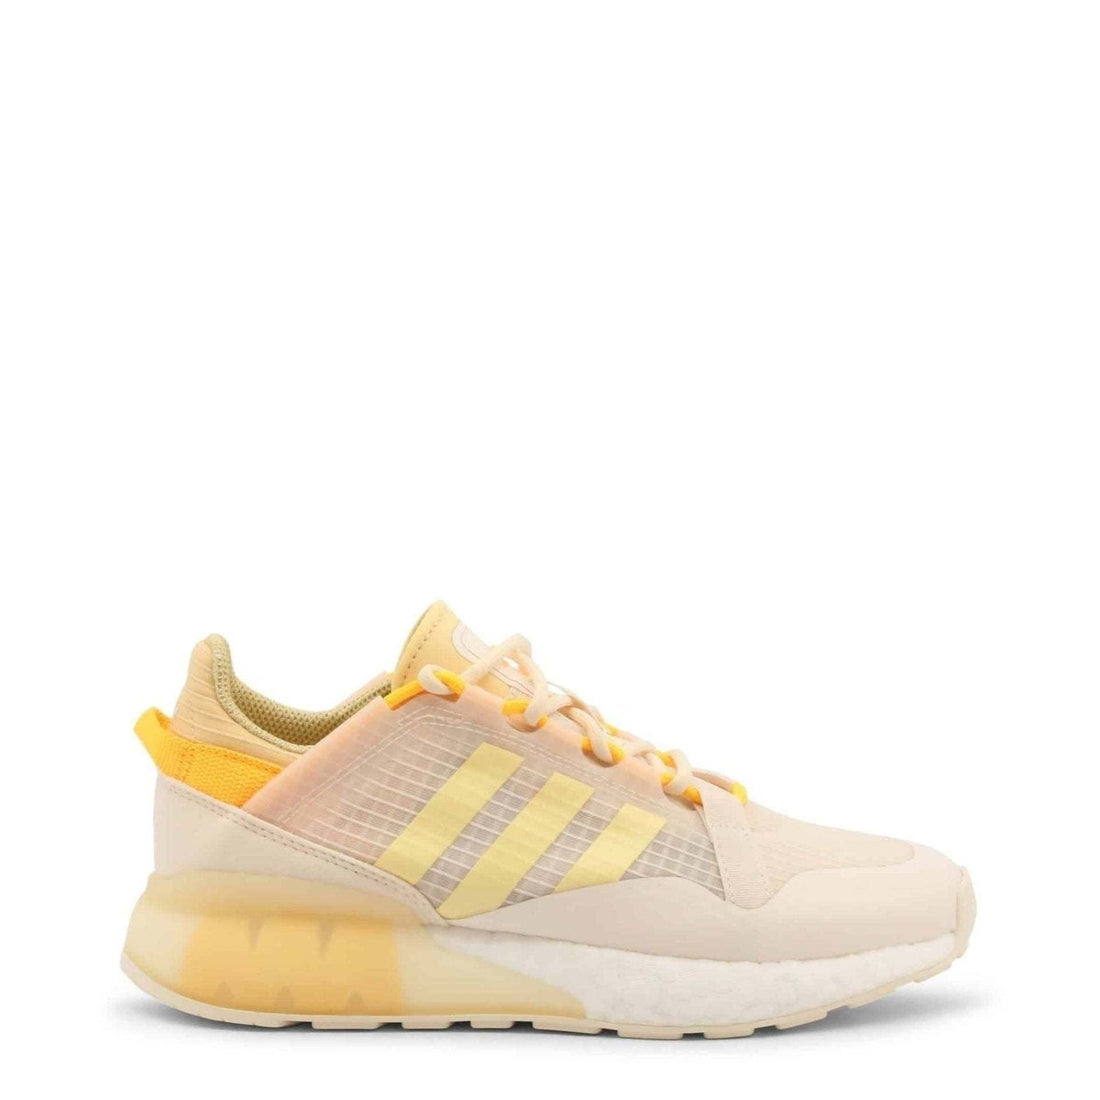 Adidas Sneakers - TINT - Sneakers - Adidas - GZ7875_ZX2K-Boost-Pure:349627